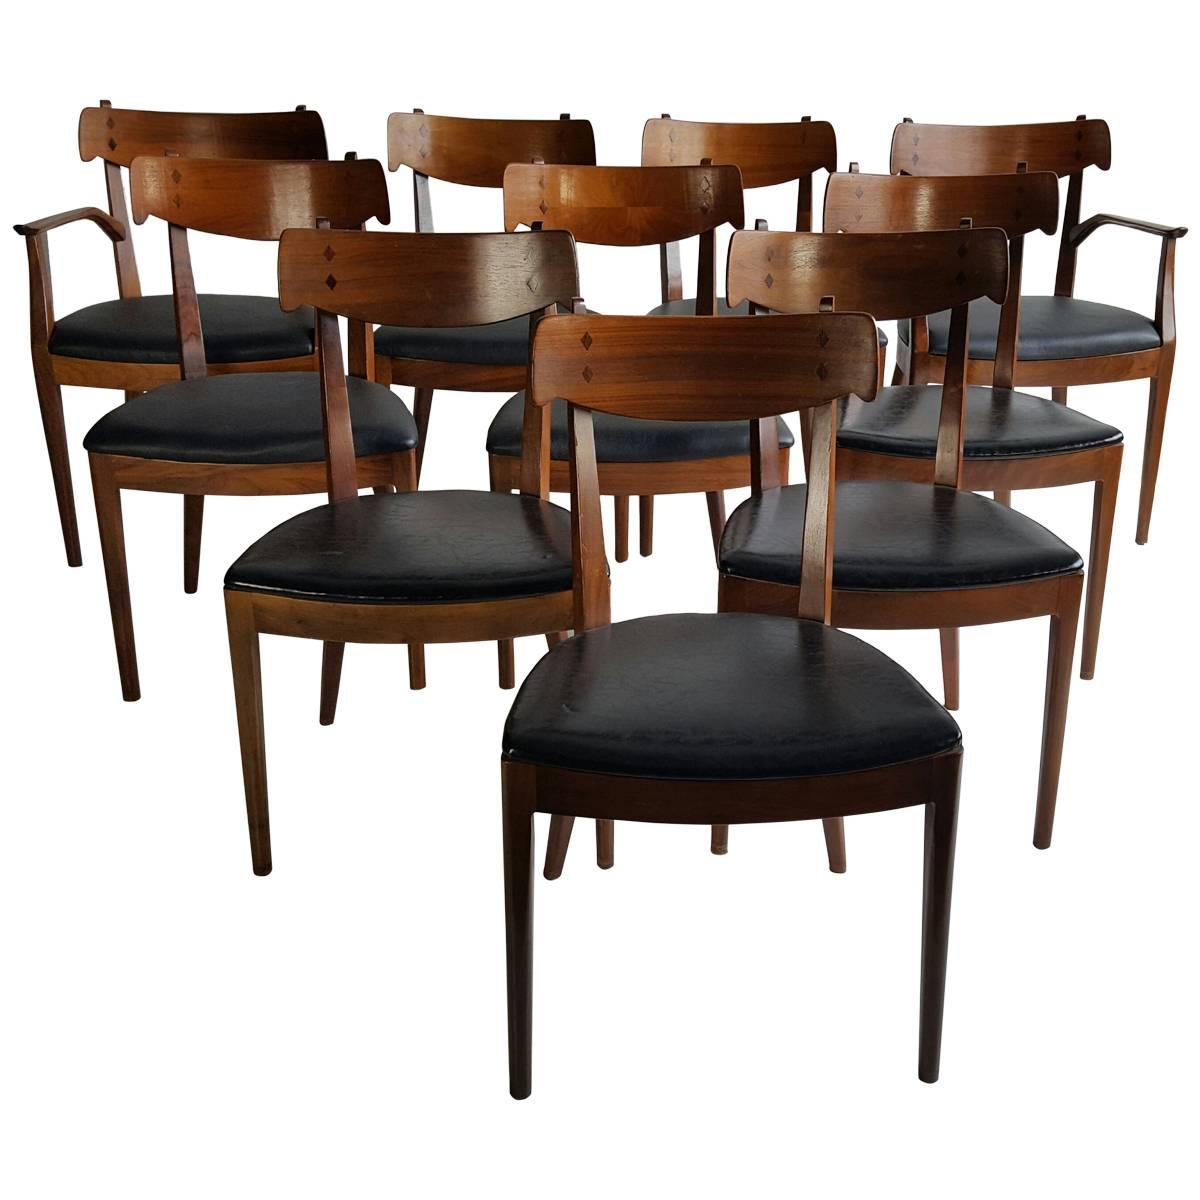 Set of Ten Mid-Century Dining Chairs by Kipp Stewart for Drexel